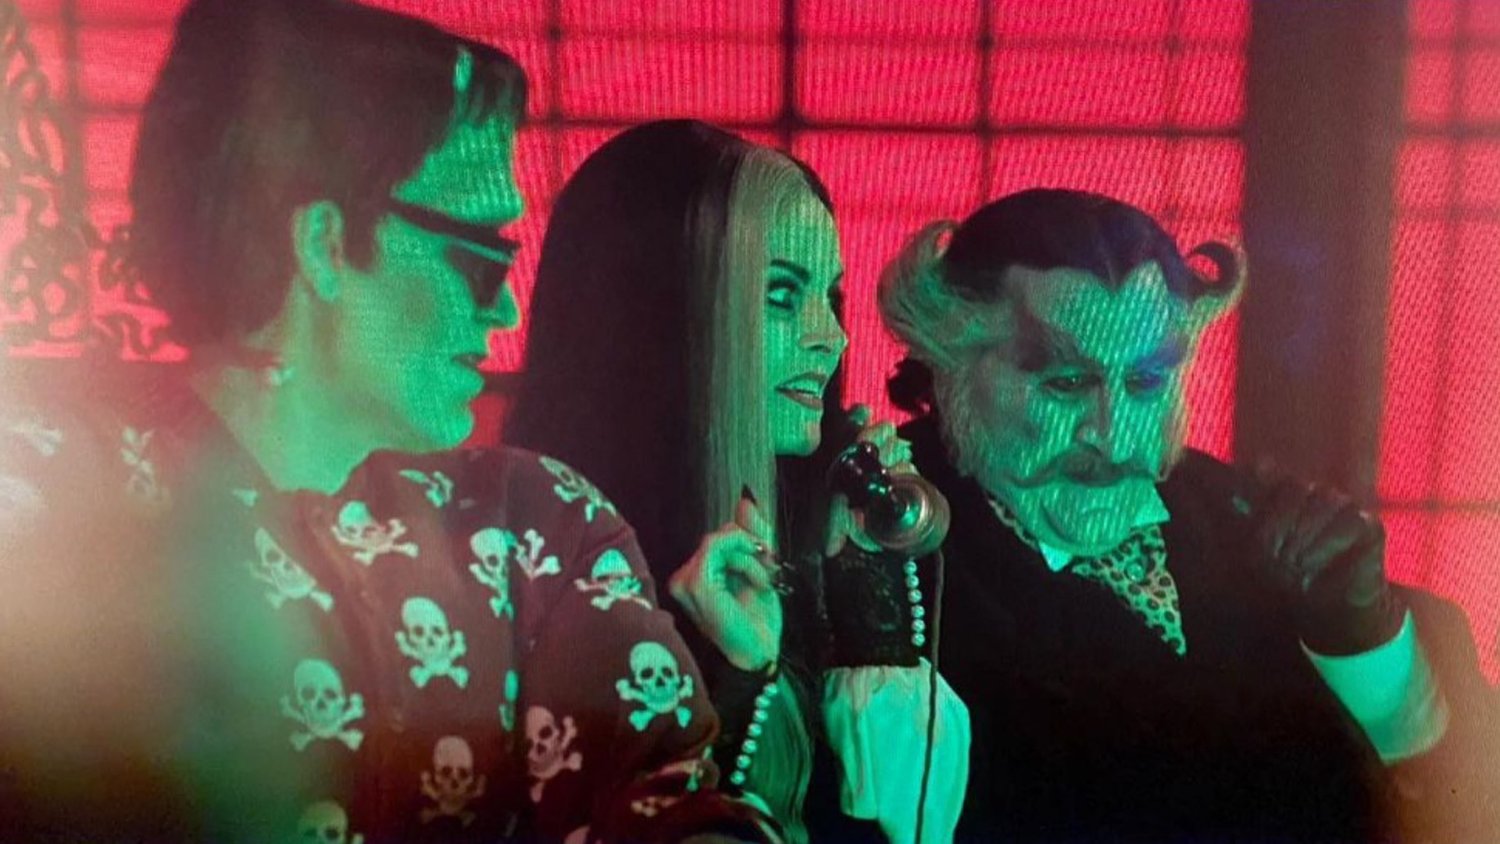 Rob Zombie Shares a New Photo From THE MUNSTERS Featuring the Munster Squad — GeekTyrant rob zombie shares a new photo from the munsters featuring the main cast